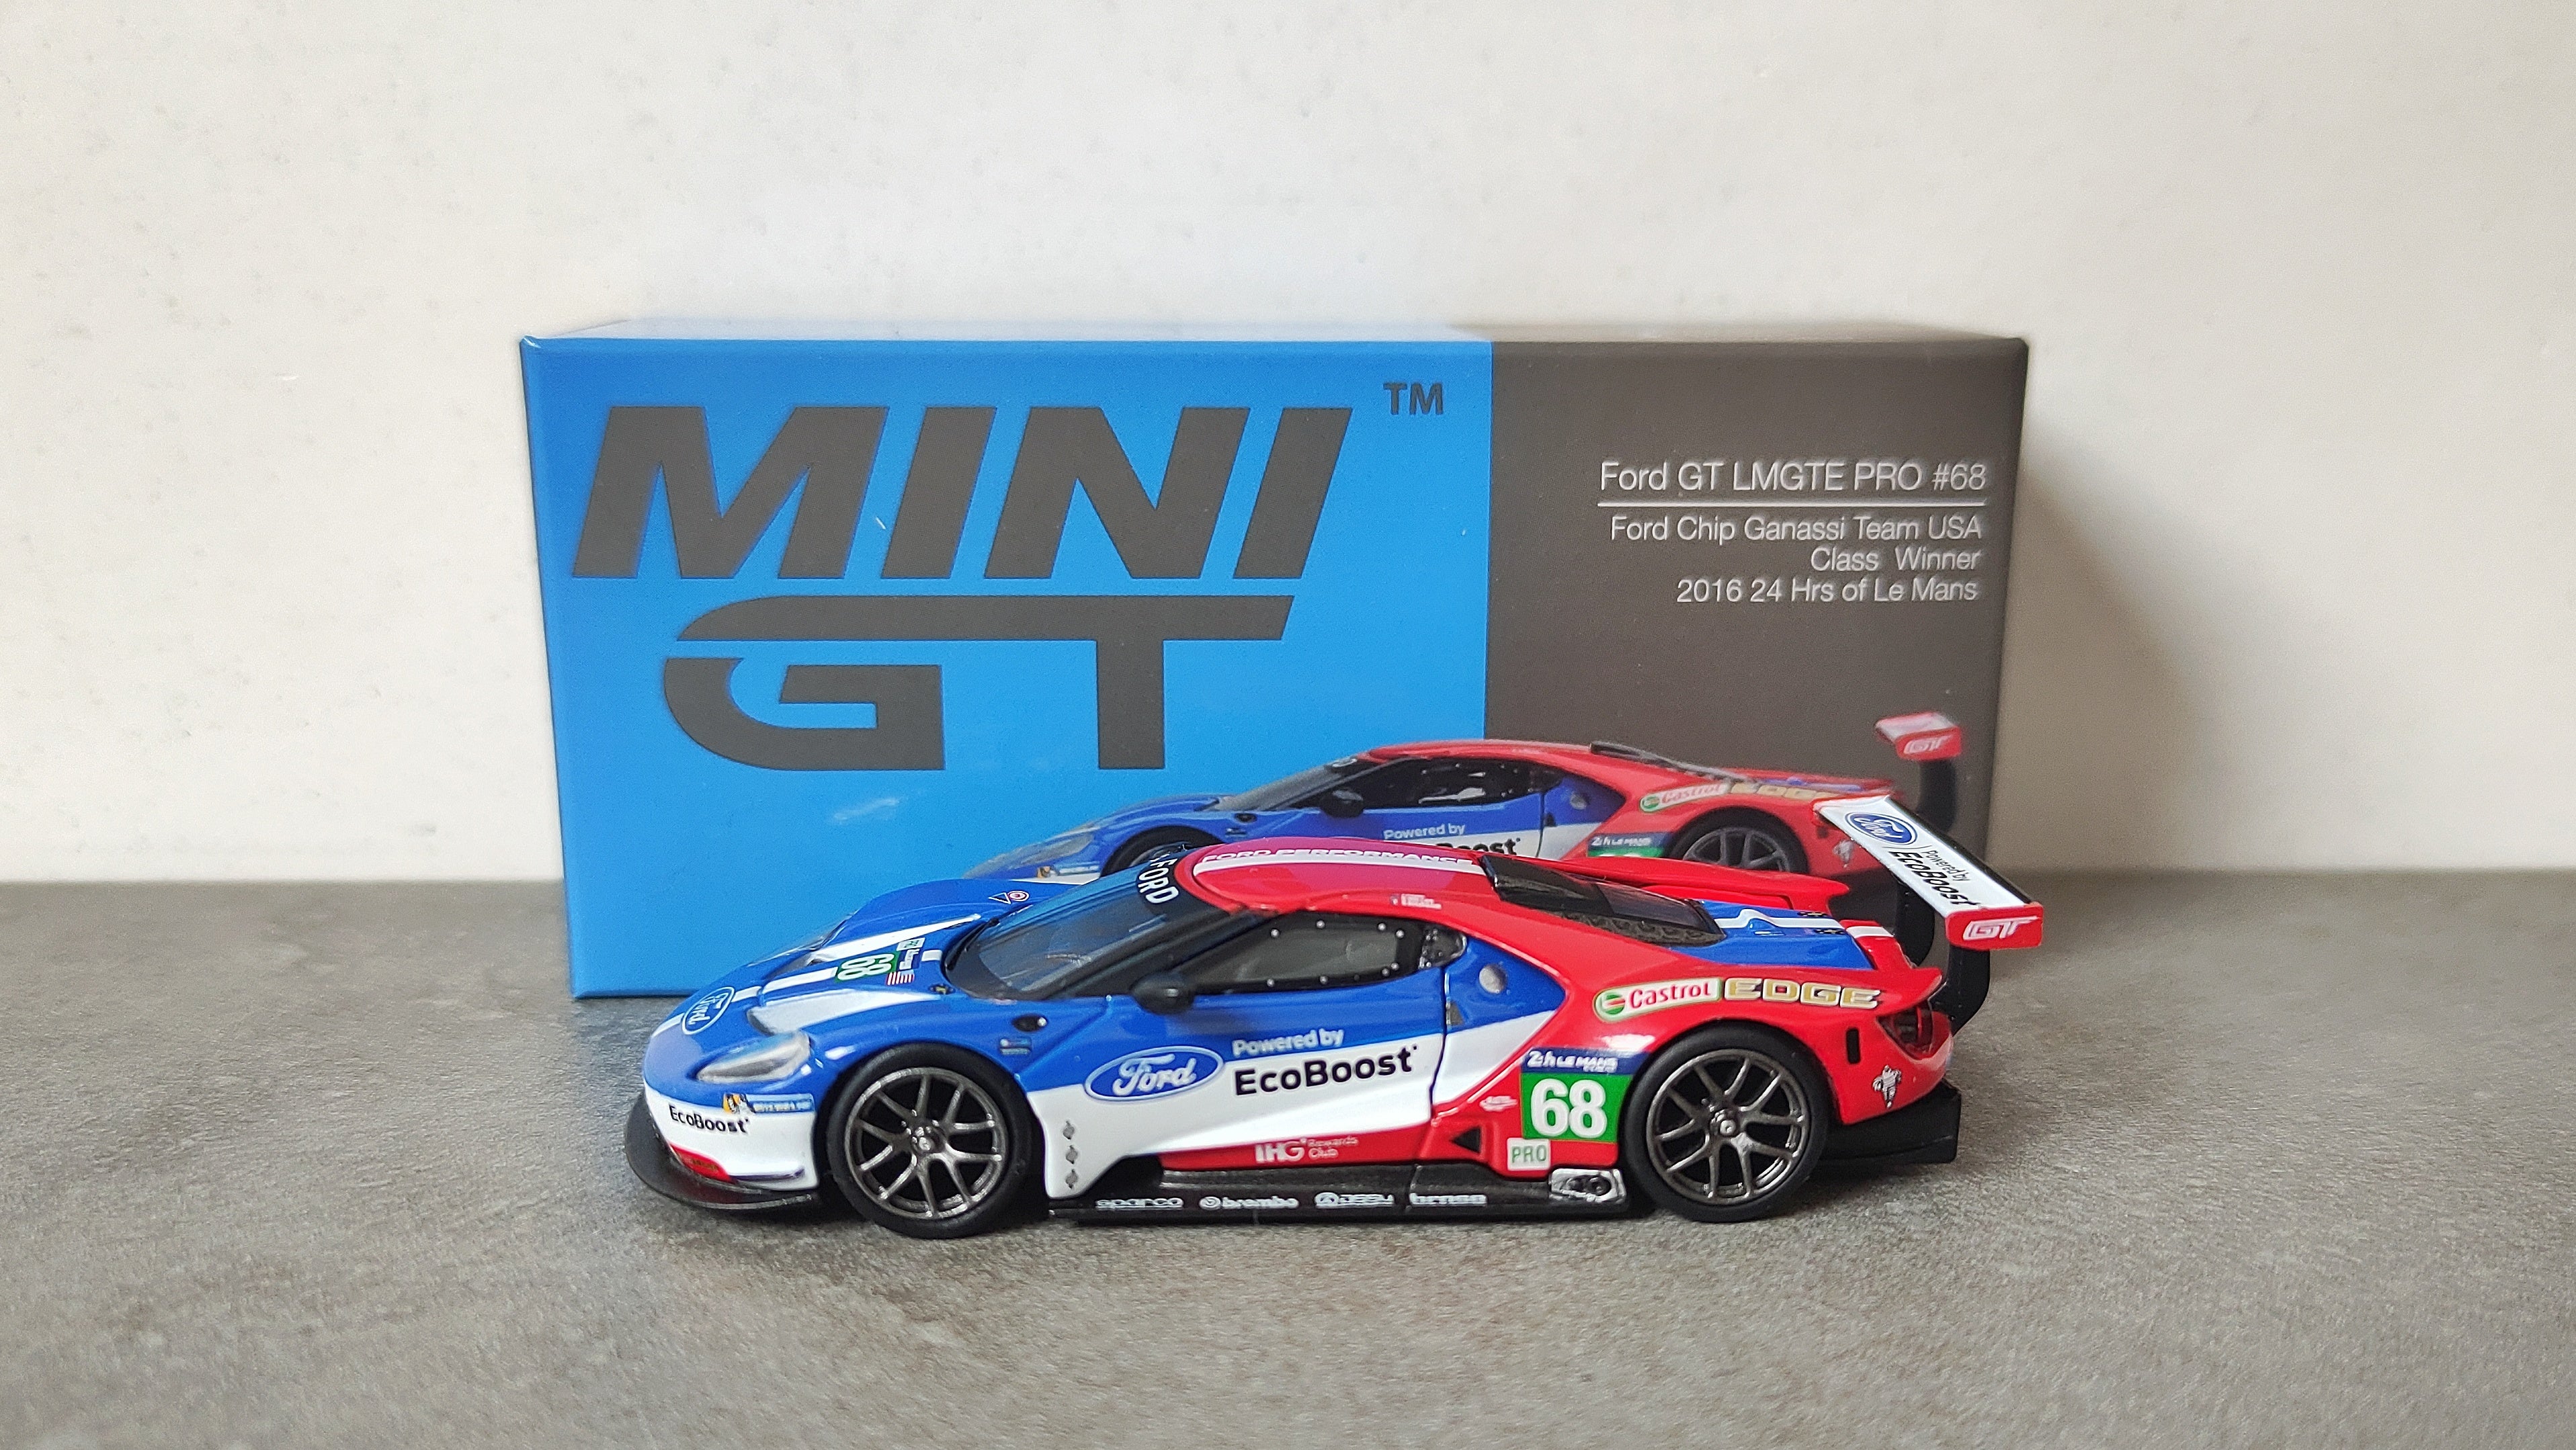 Mini GT TSM Ford GT LMGTE Pro #68 Ford Chip Ganassi Team USA Le Mans W –  racepassionstore